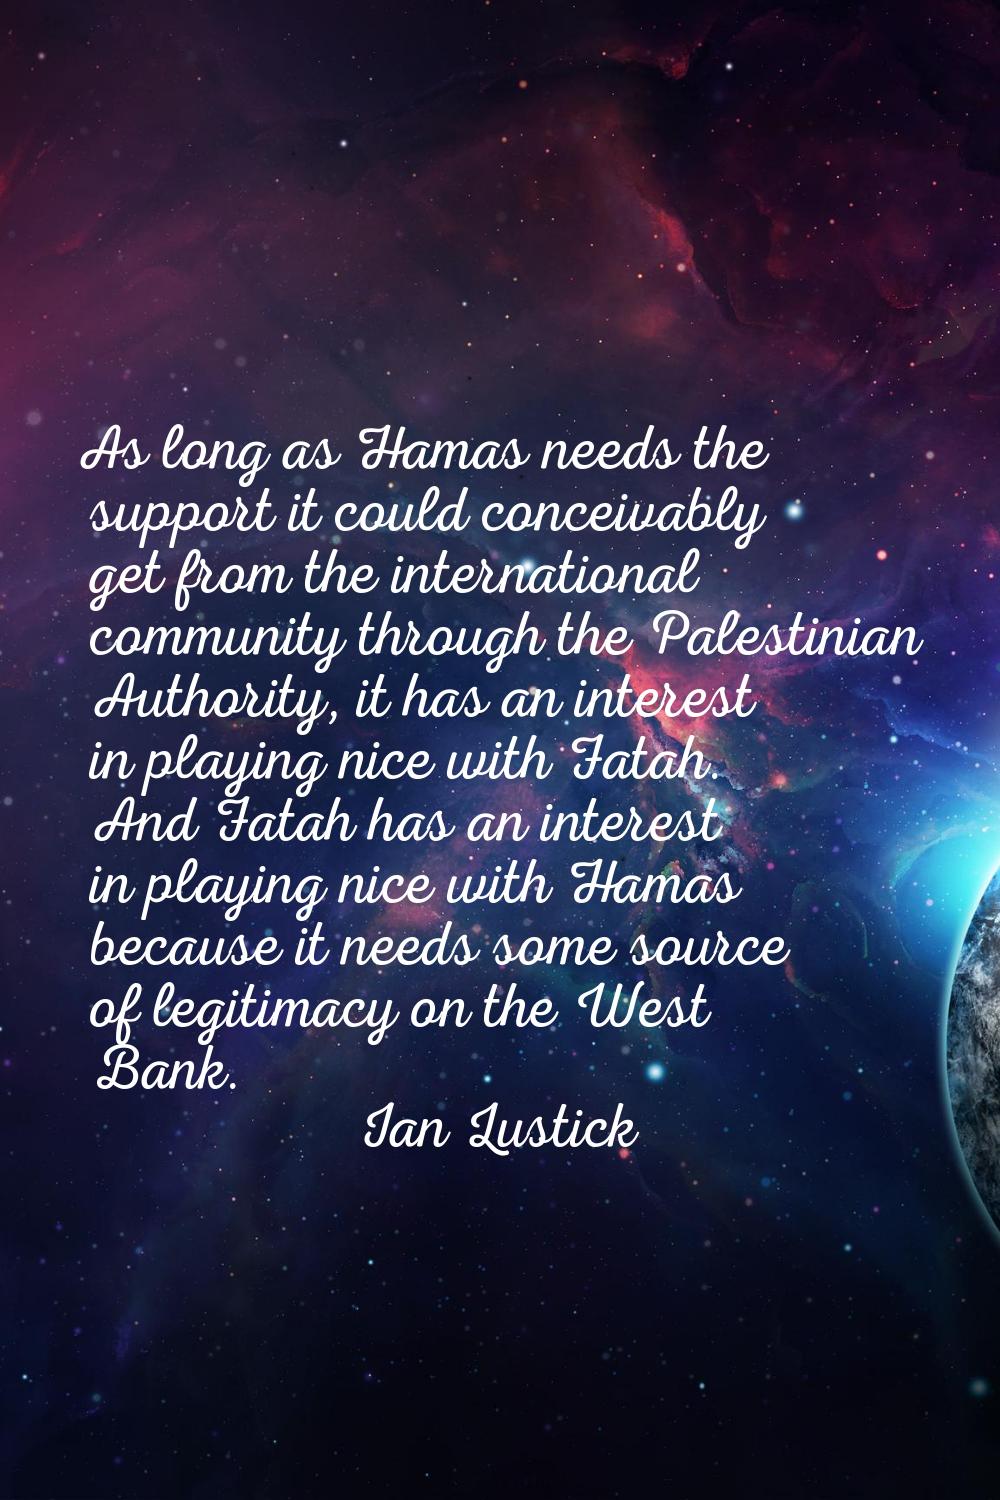 As long as Hamas needs the support it could conceivably get from the international community throug